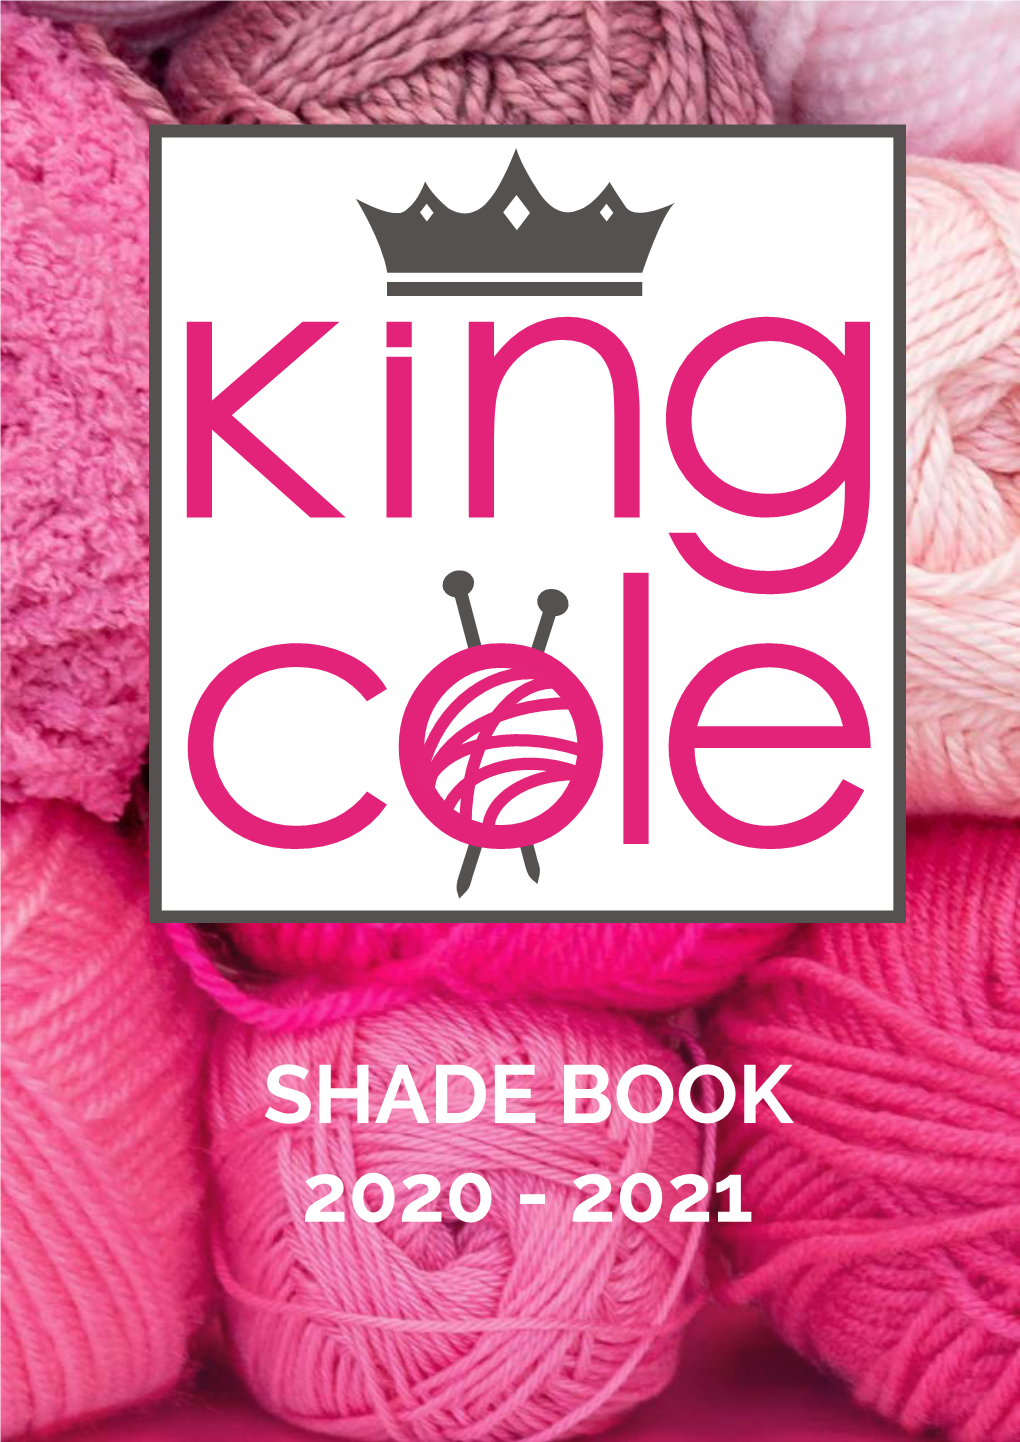 SHADE BOOK 2020 - 2021 About Us